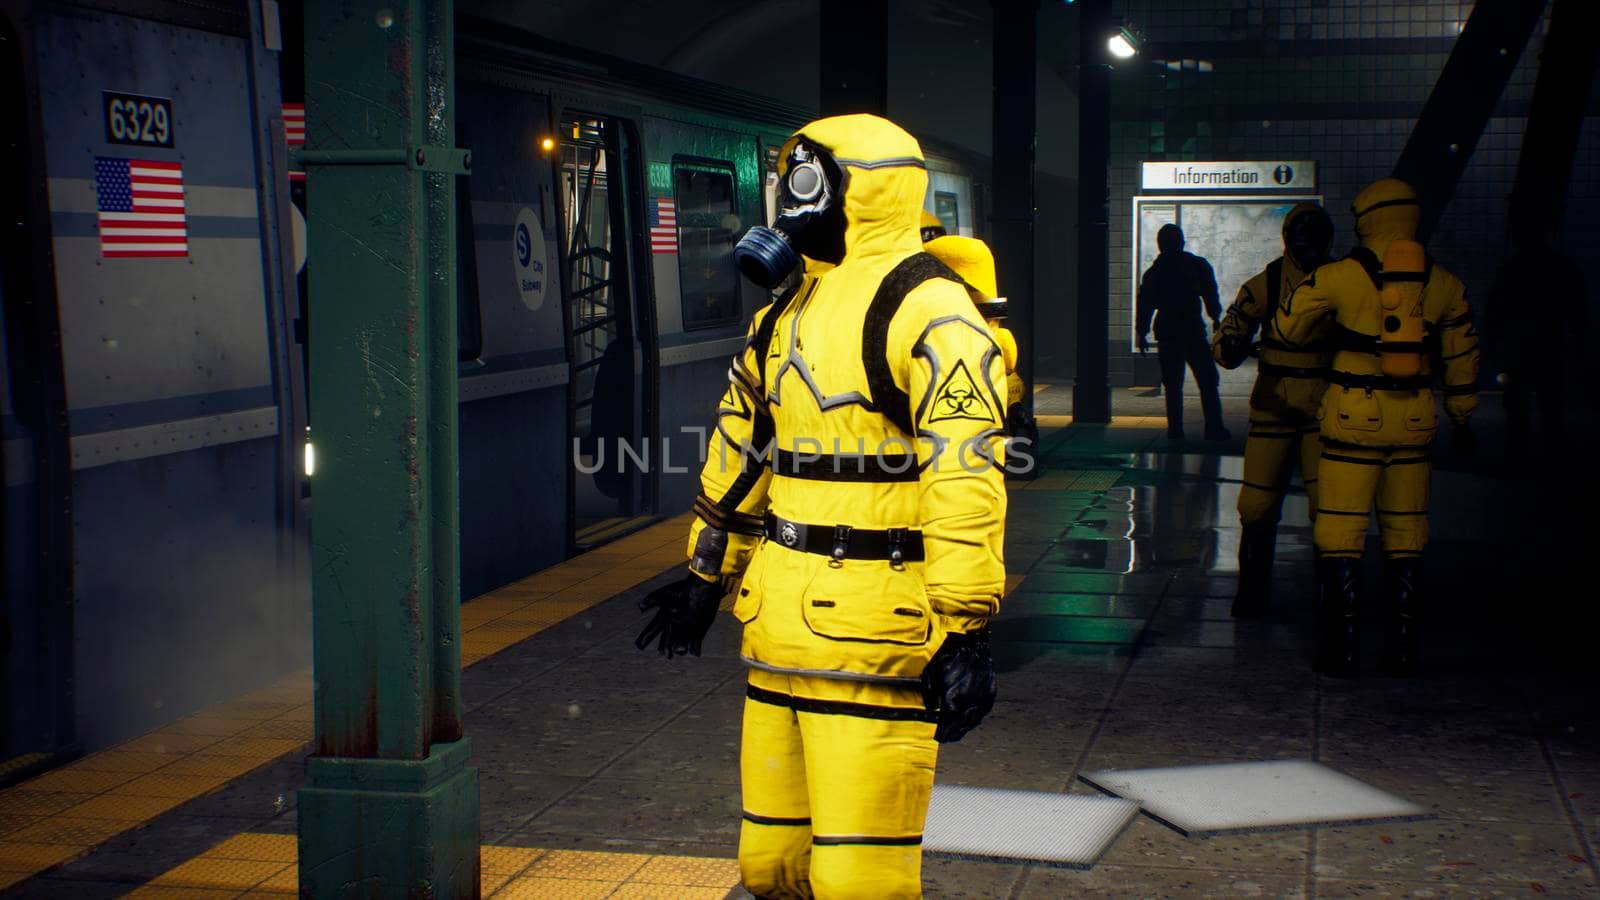 People in chemical protective clothing are waiting for the train to go to fight the epidemic. The concept of a post-apocalyptic world after a global pandemic. 3D Rendering by designprojects